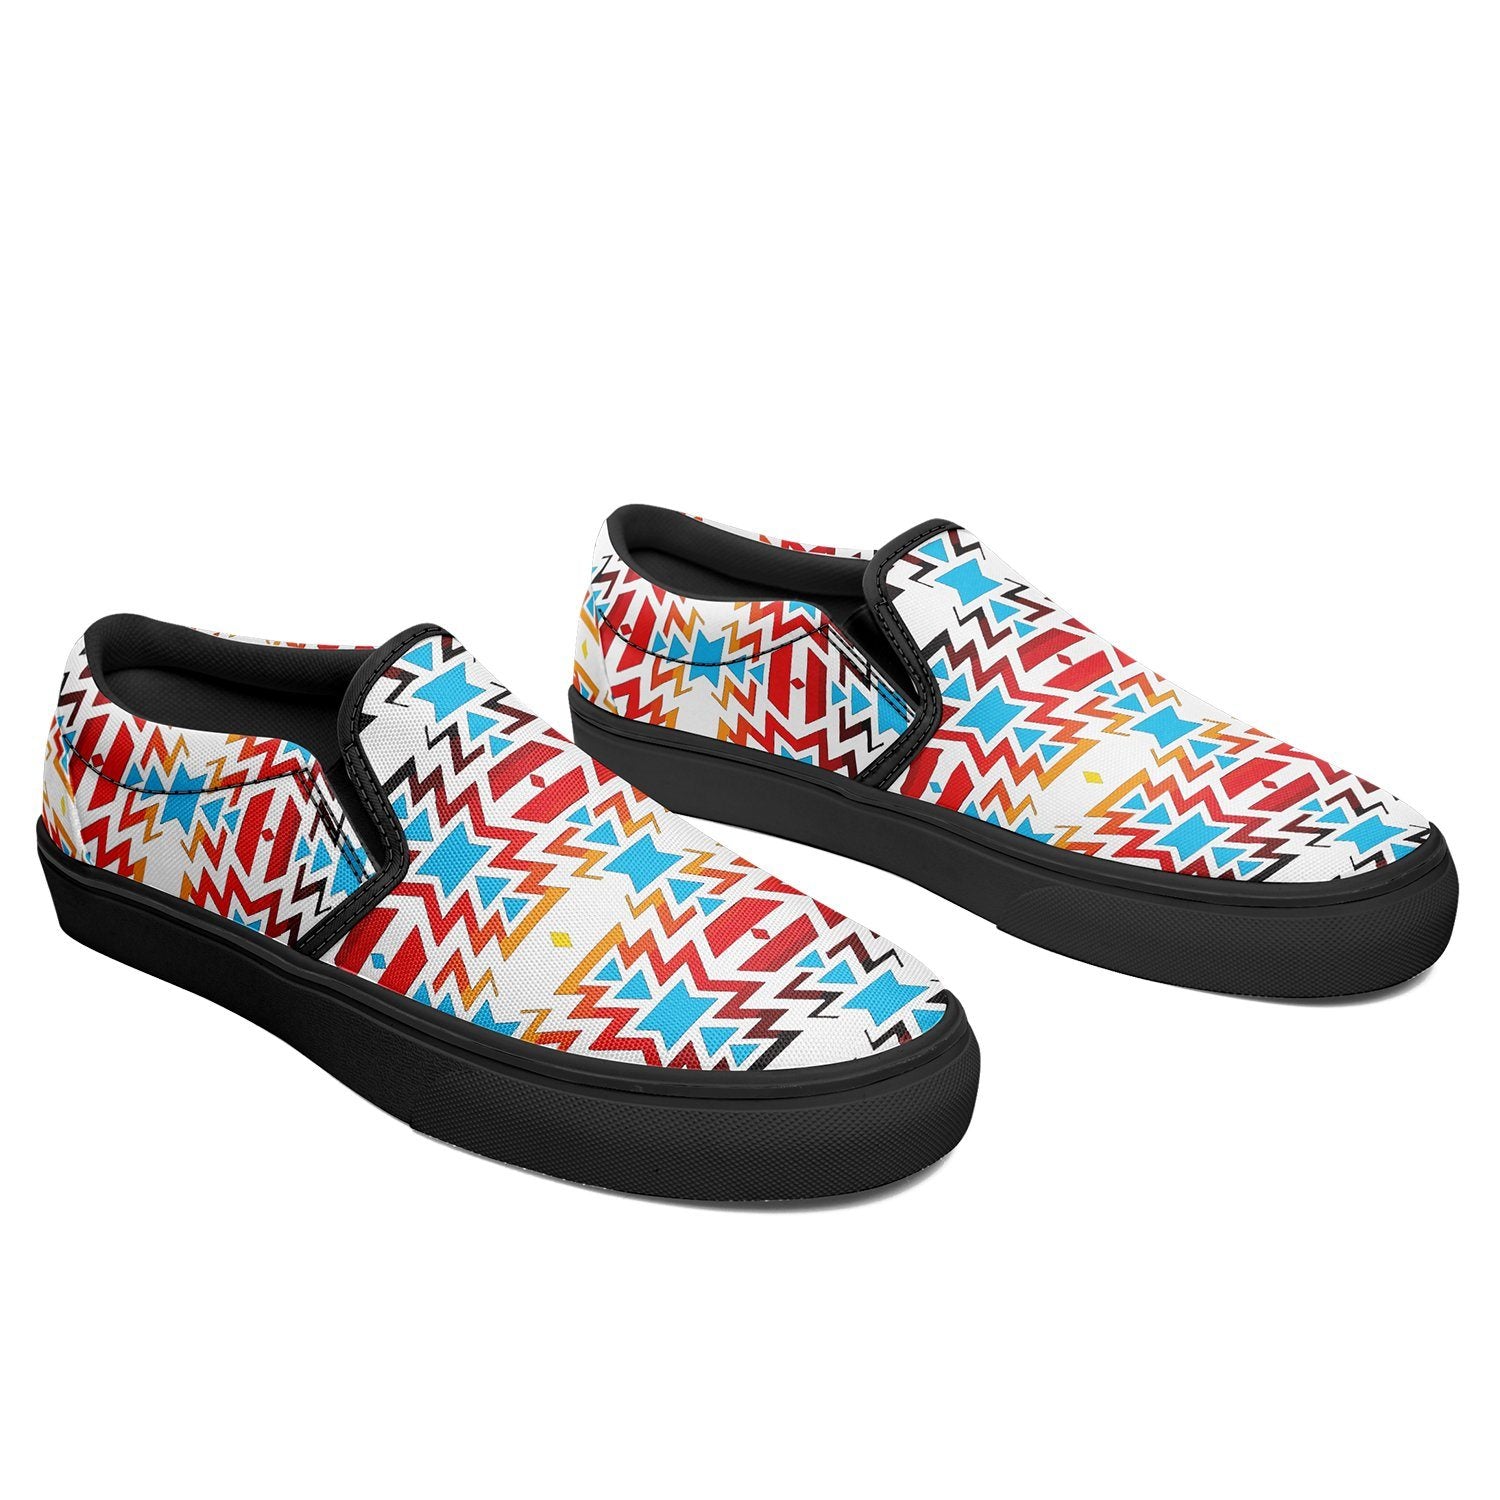 Fire Colors and Sky Otoyimm Canvas Slip On Shoes 49 Dzine 